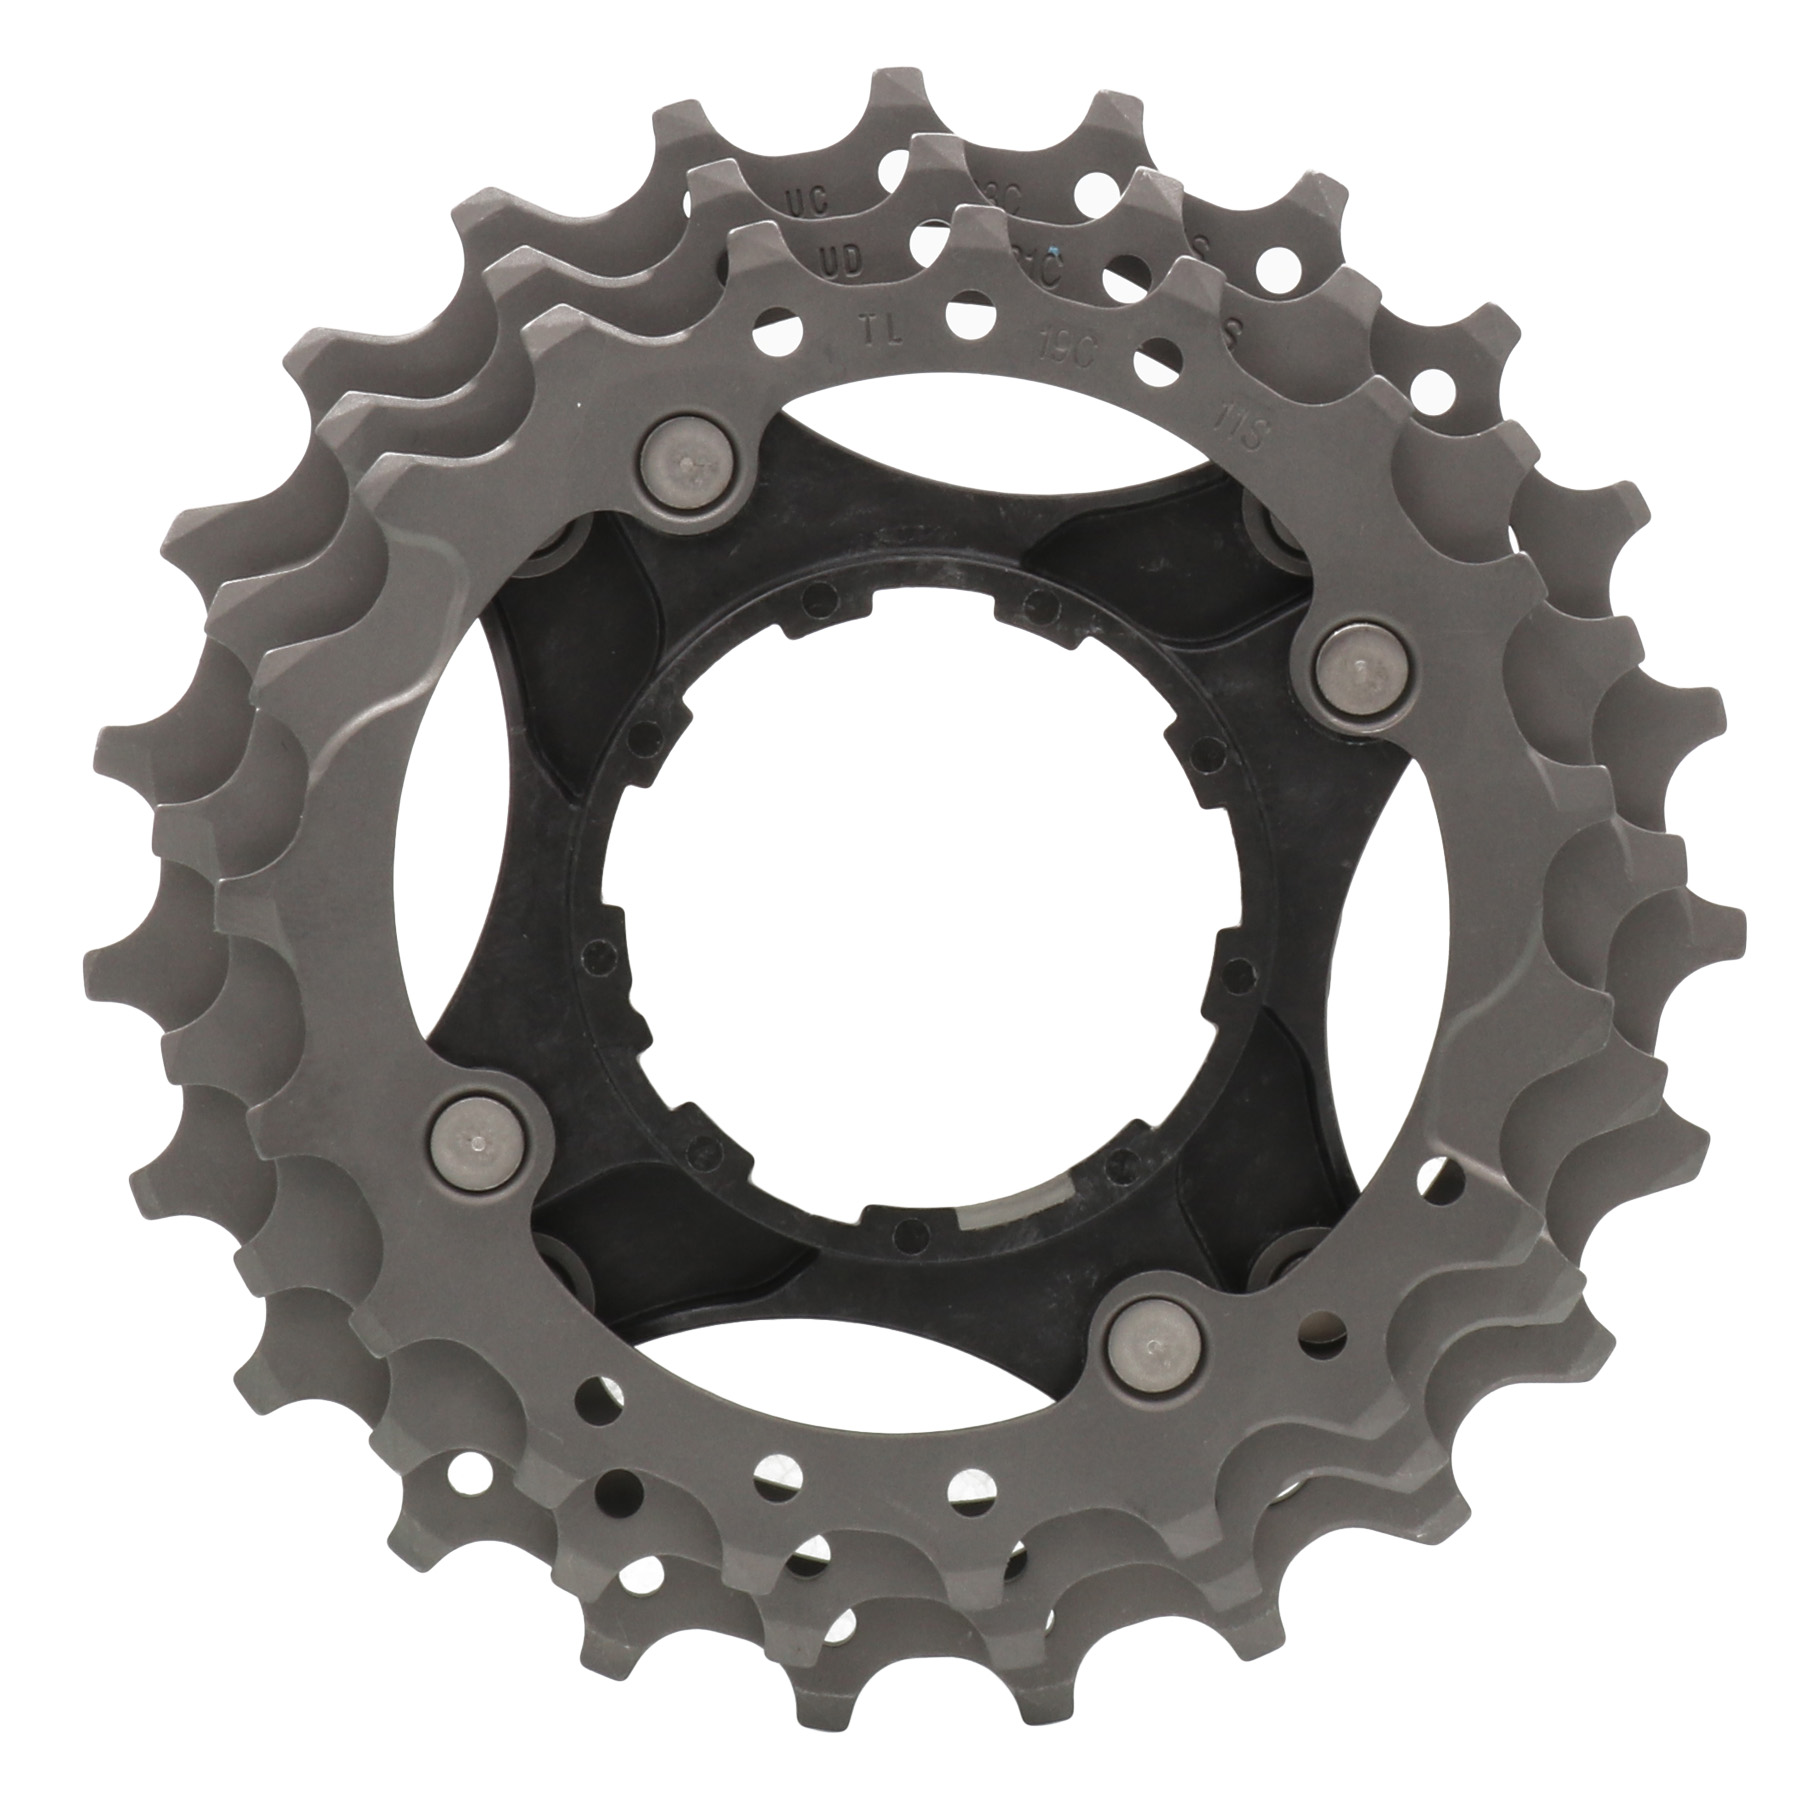 Picture of Shimano Sprocket for Dura Ace 11-Speed Cassette - 19-21-23 T for 12-28 (Y1YC98160) - CS-9000